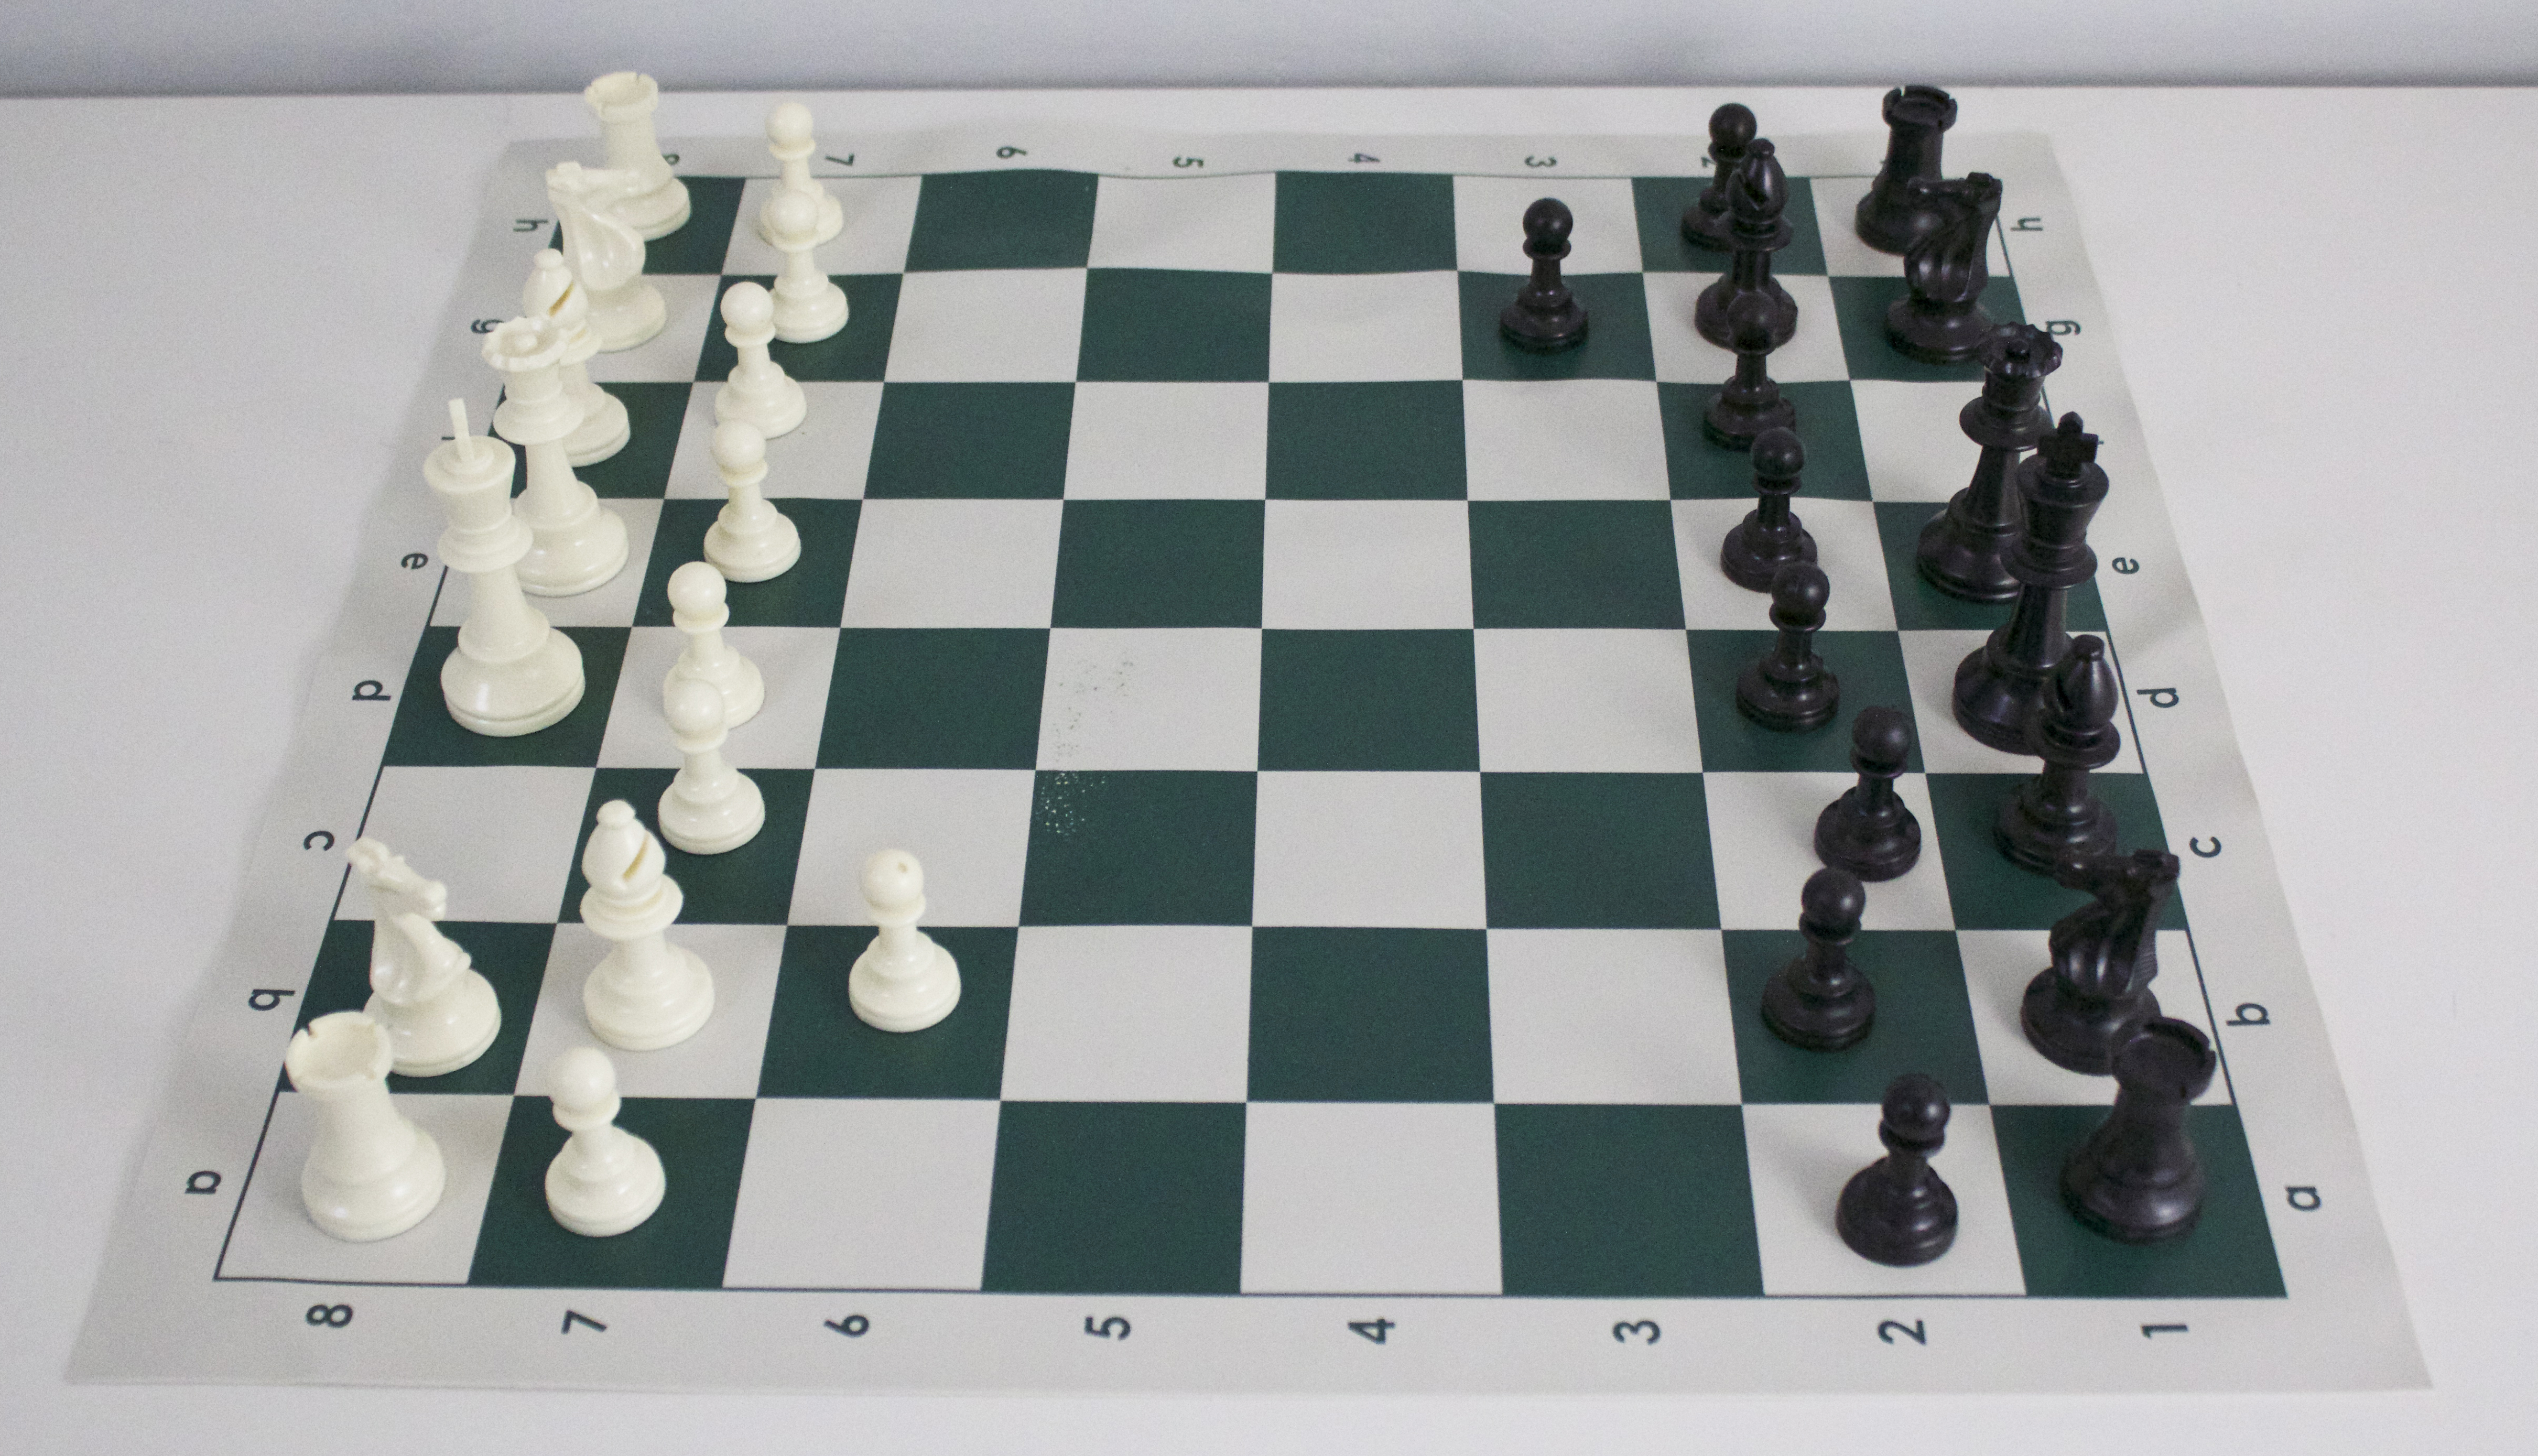 The Kenilworthian: A Black Fianchetto System in the Open Games, Part One